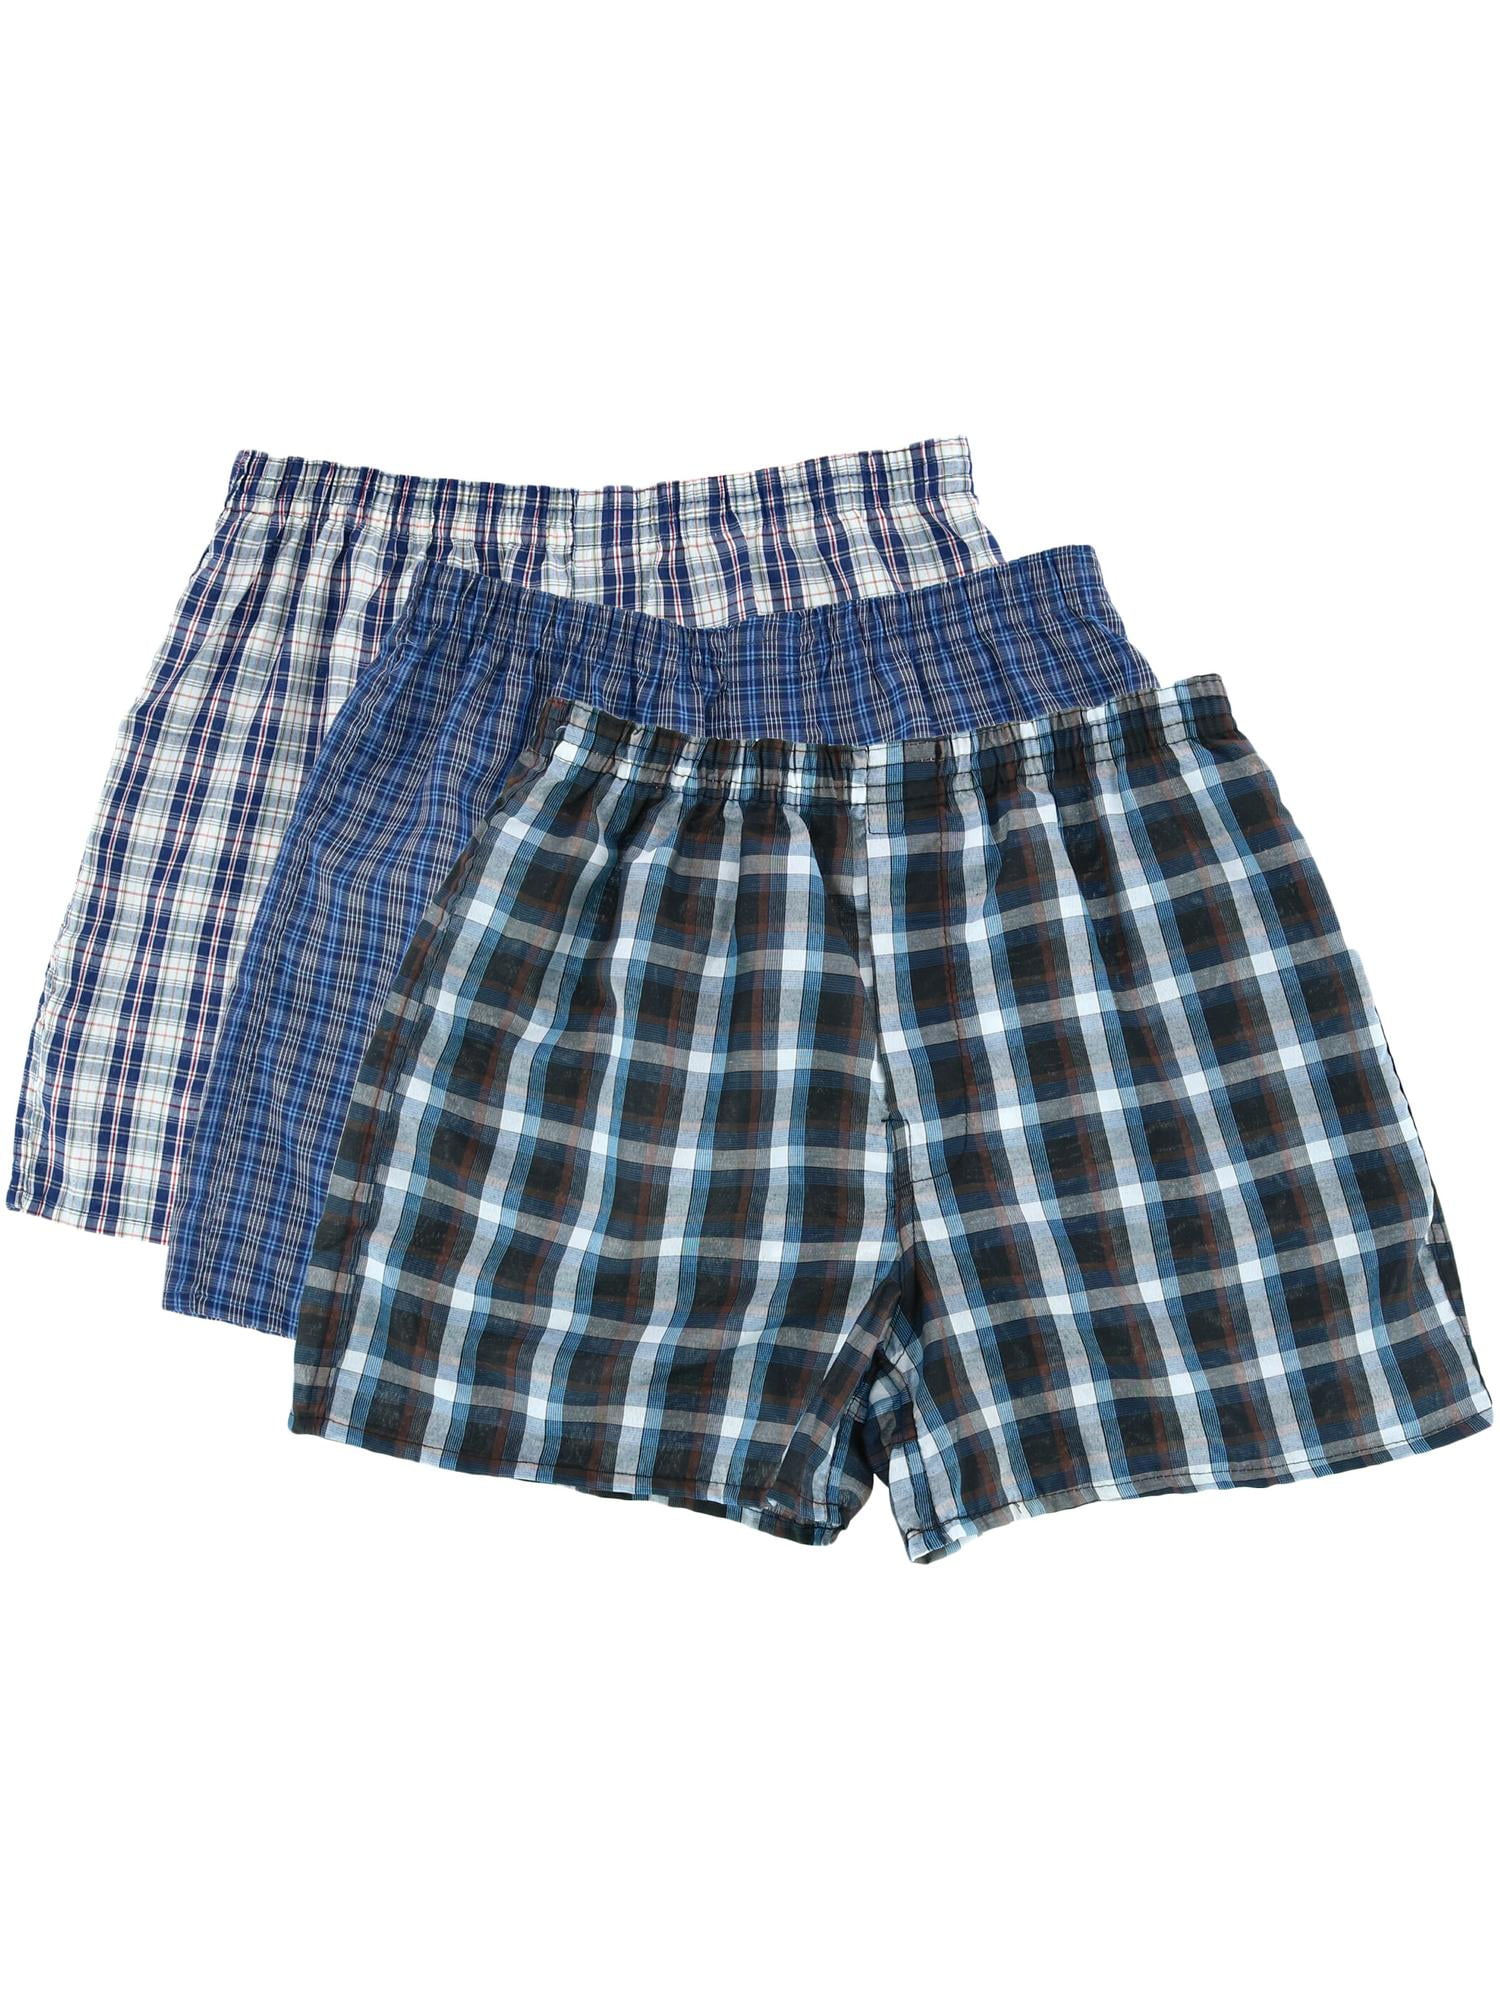 ToBeInStyle Mens 3 Pack or 6 Pack Classic Multicolored Checkered Woven Boxer Shorts w/Button